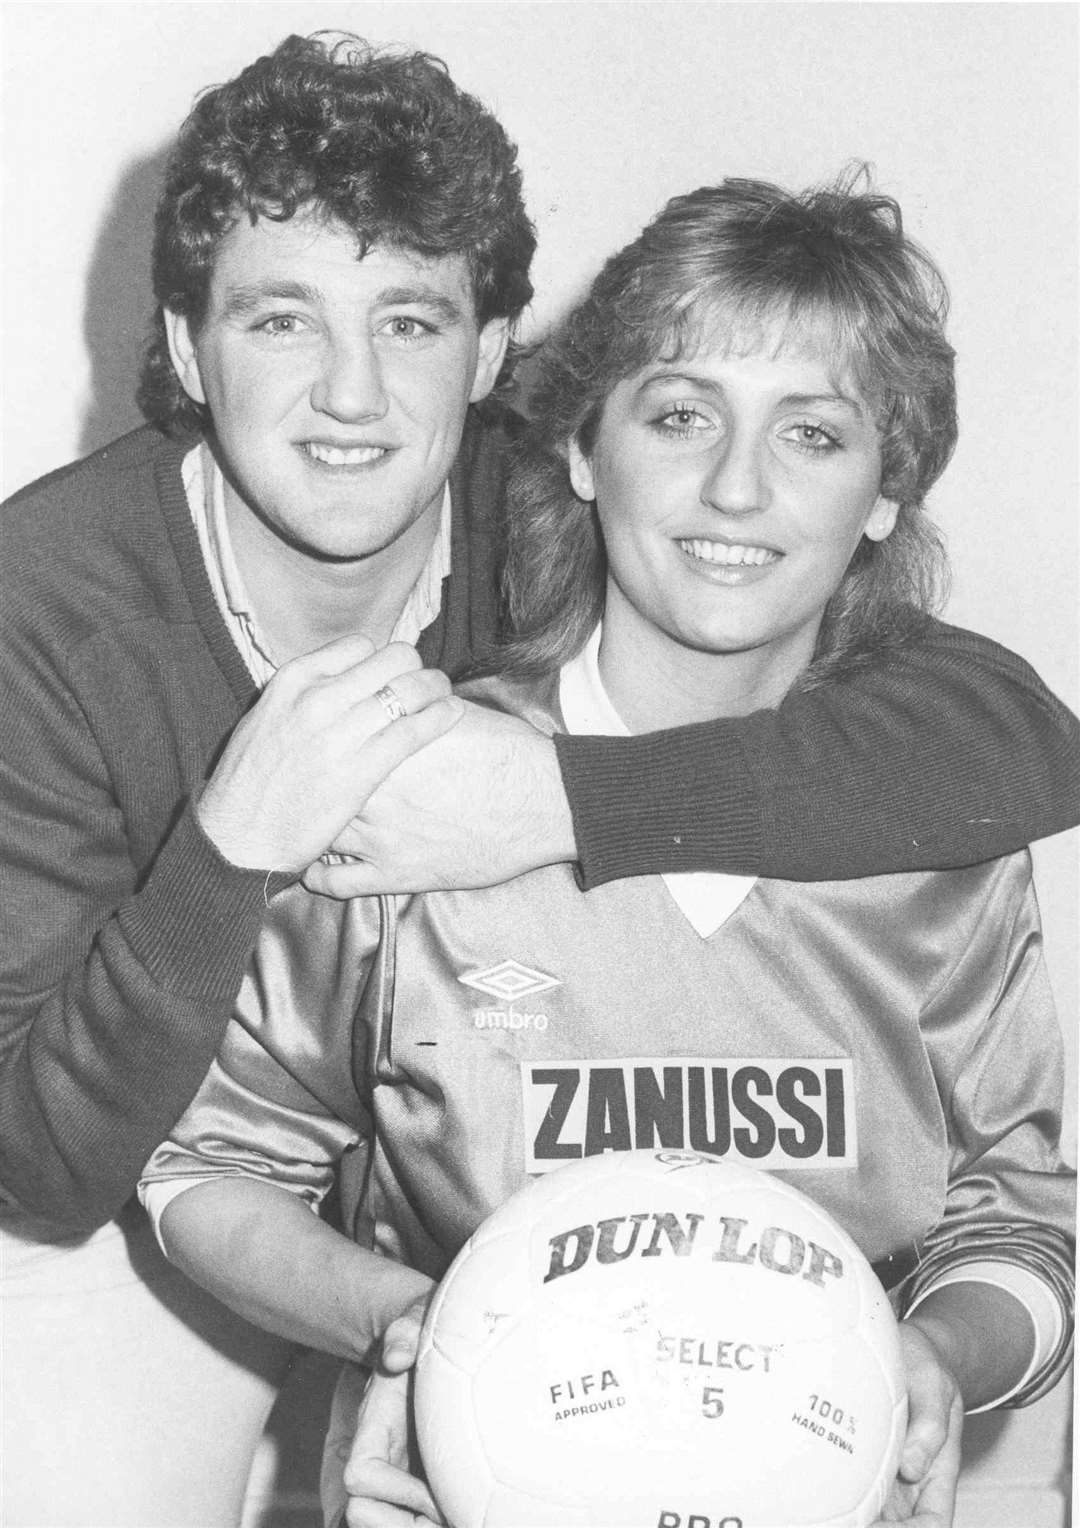 Newcastle United manager Steve Bruce pictured in his playing days at Gillingham with his wife Jan in 1984. He made more than 200 appearances for the club before being signed by Norwich